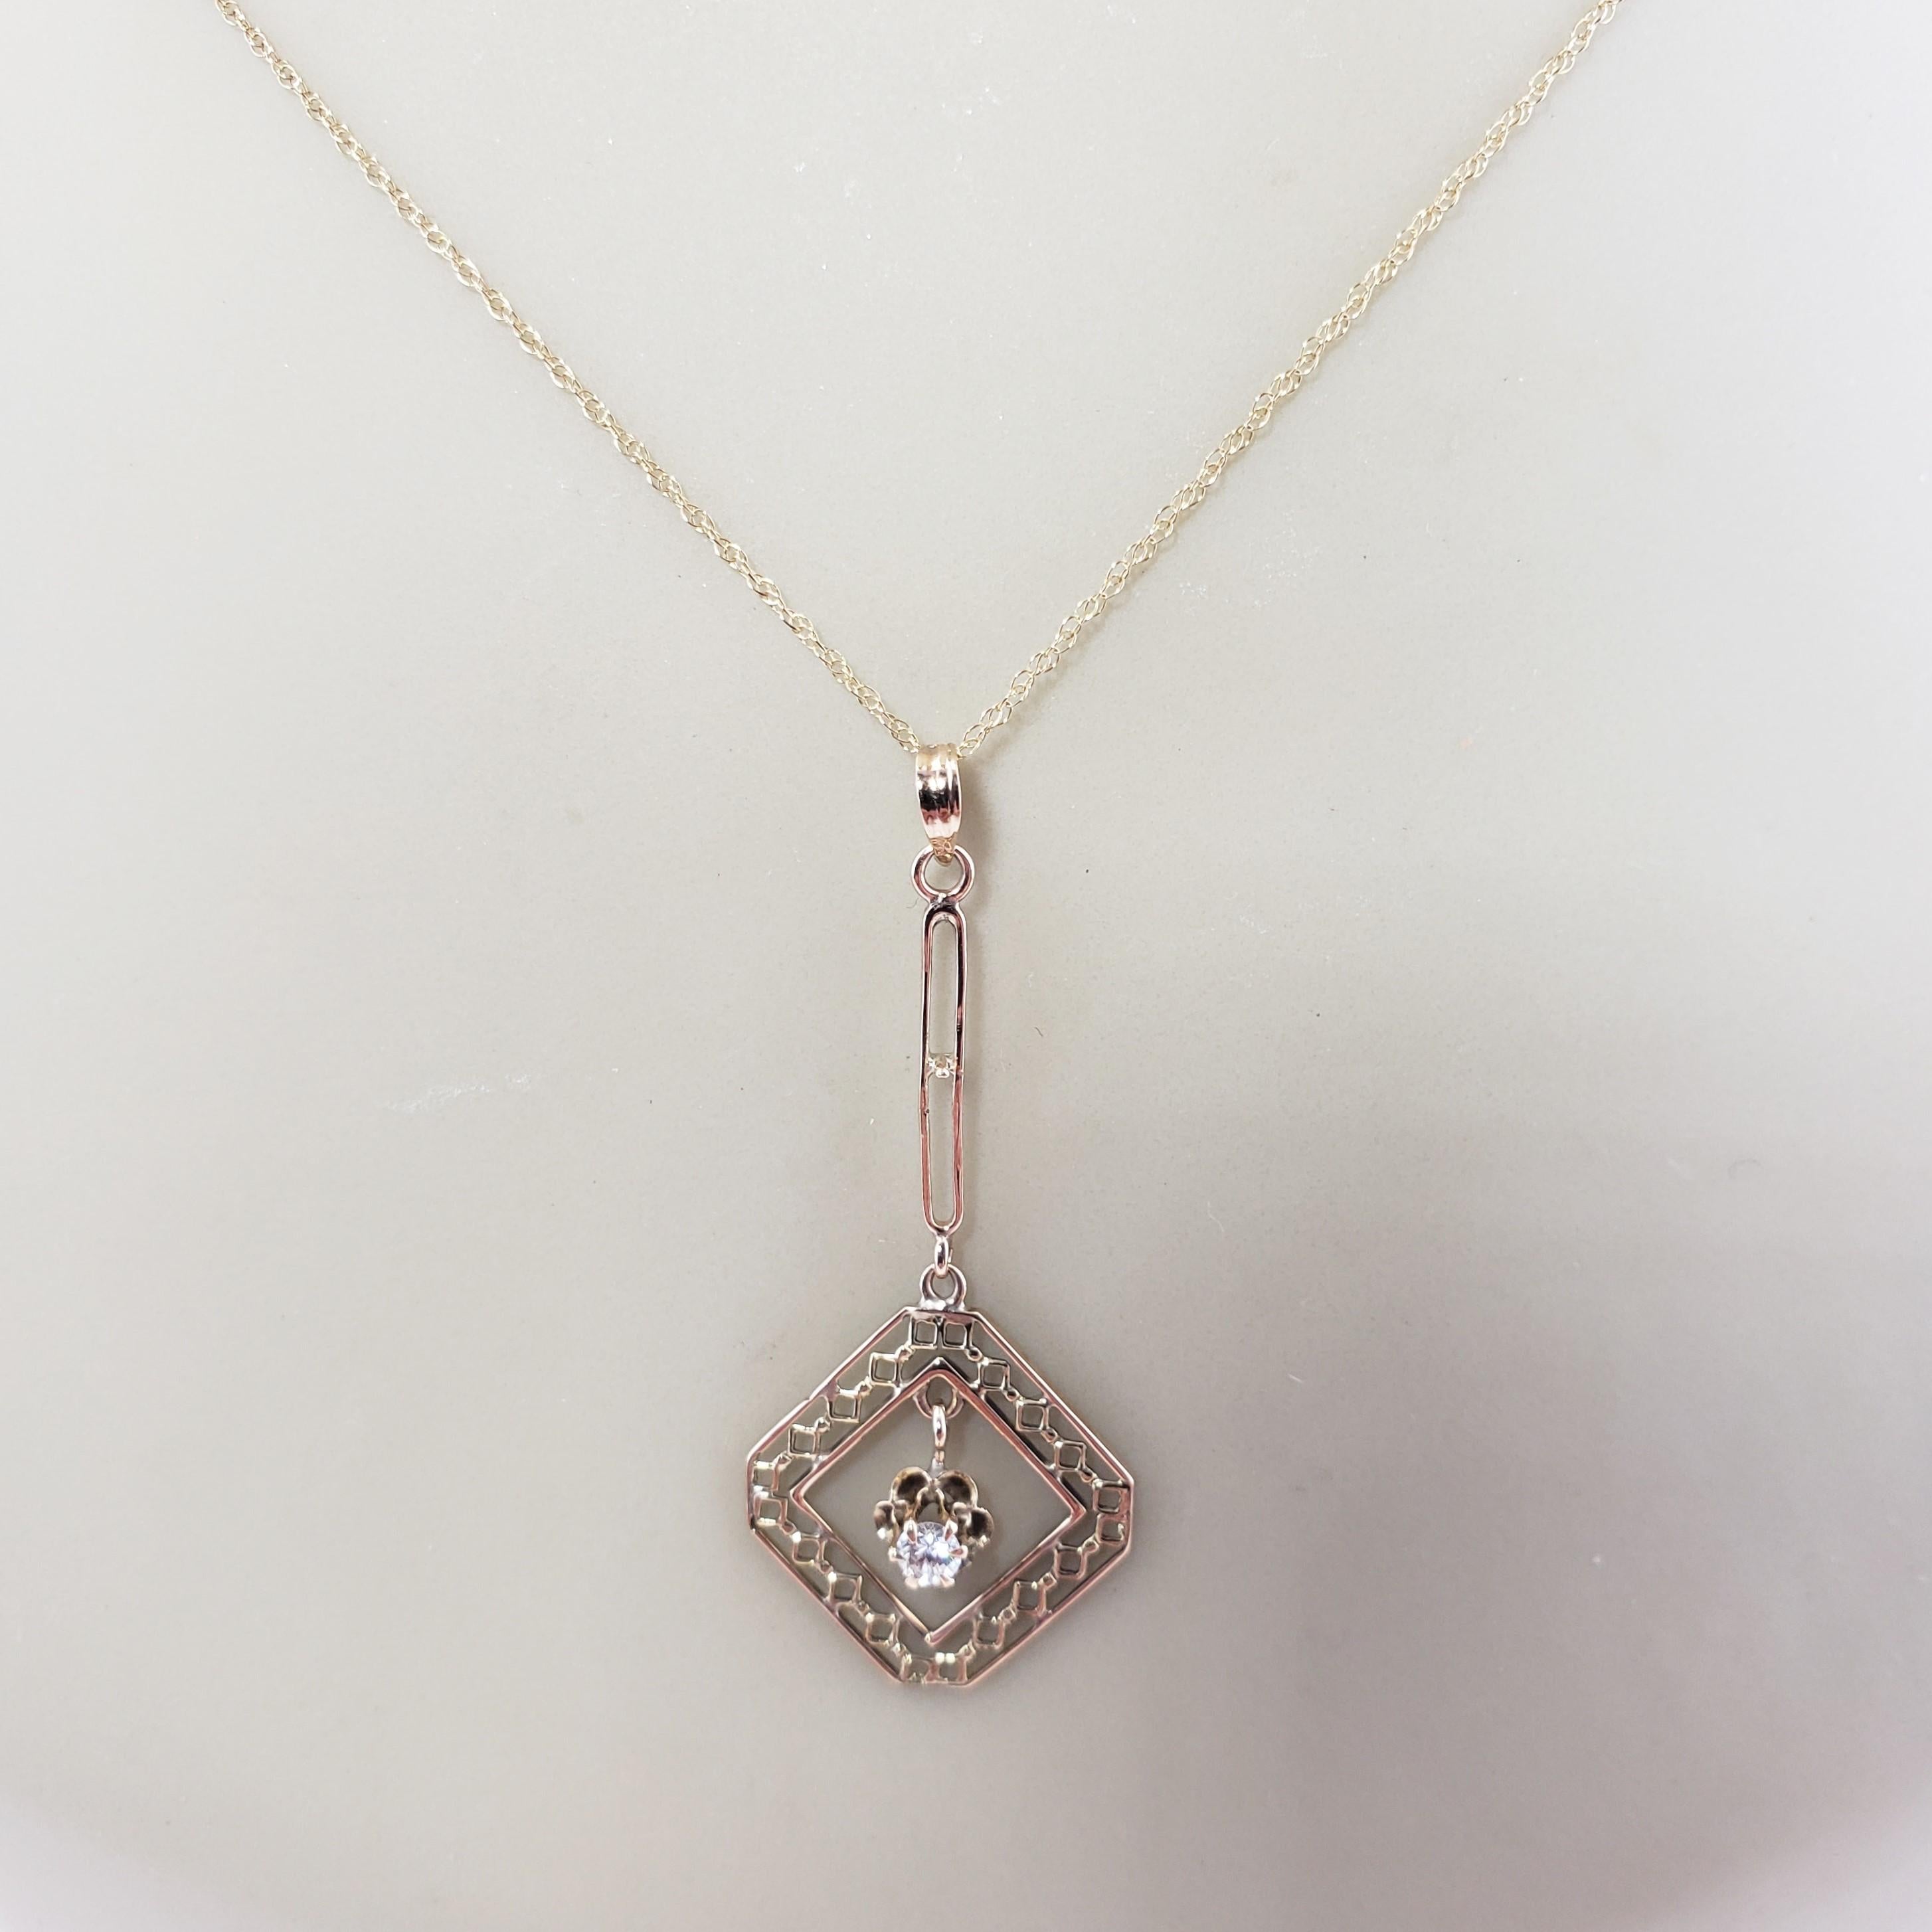 10 Karat Yellow Gold and Diamond Pendant Necklace For Sale 1